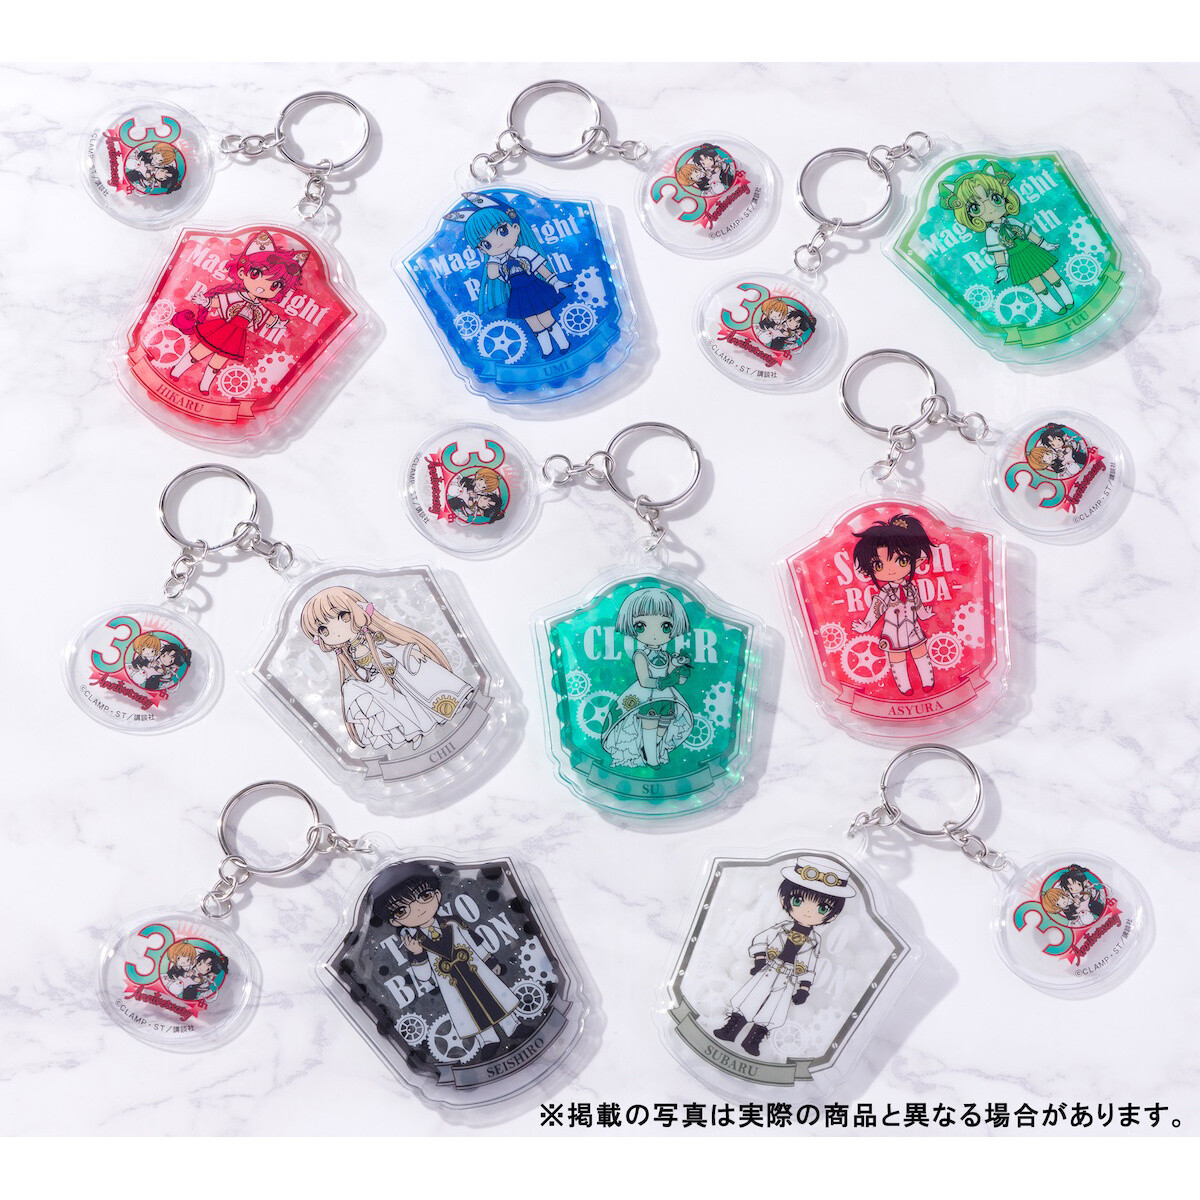 CLAMP 30th Anniversary Trading Gel Keychains Part 1: Broccoli